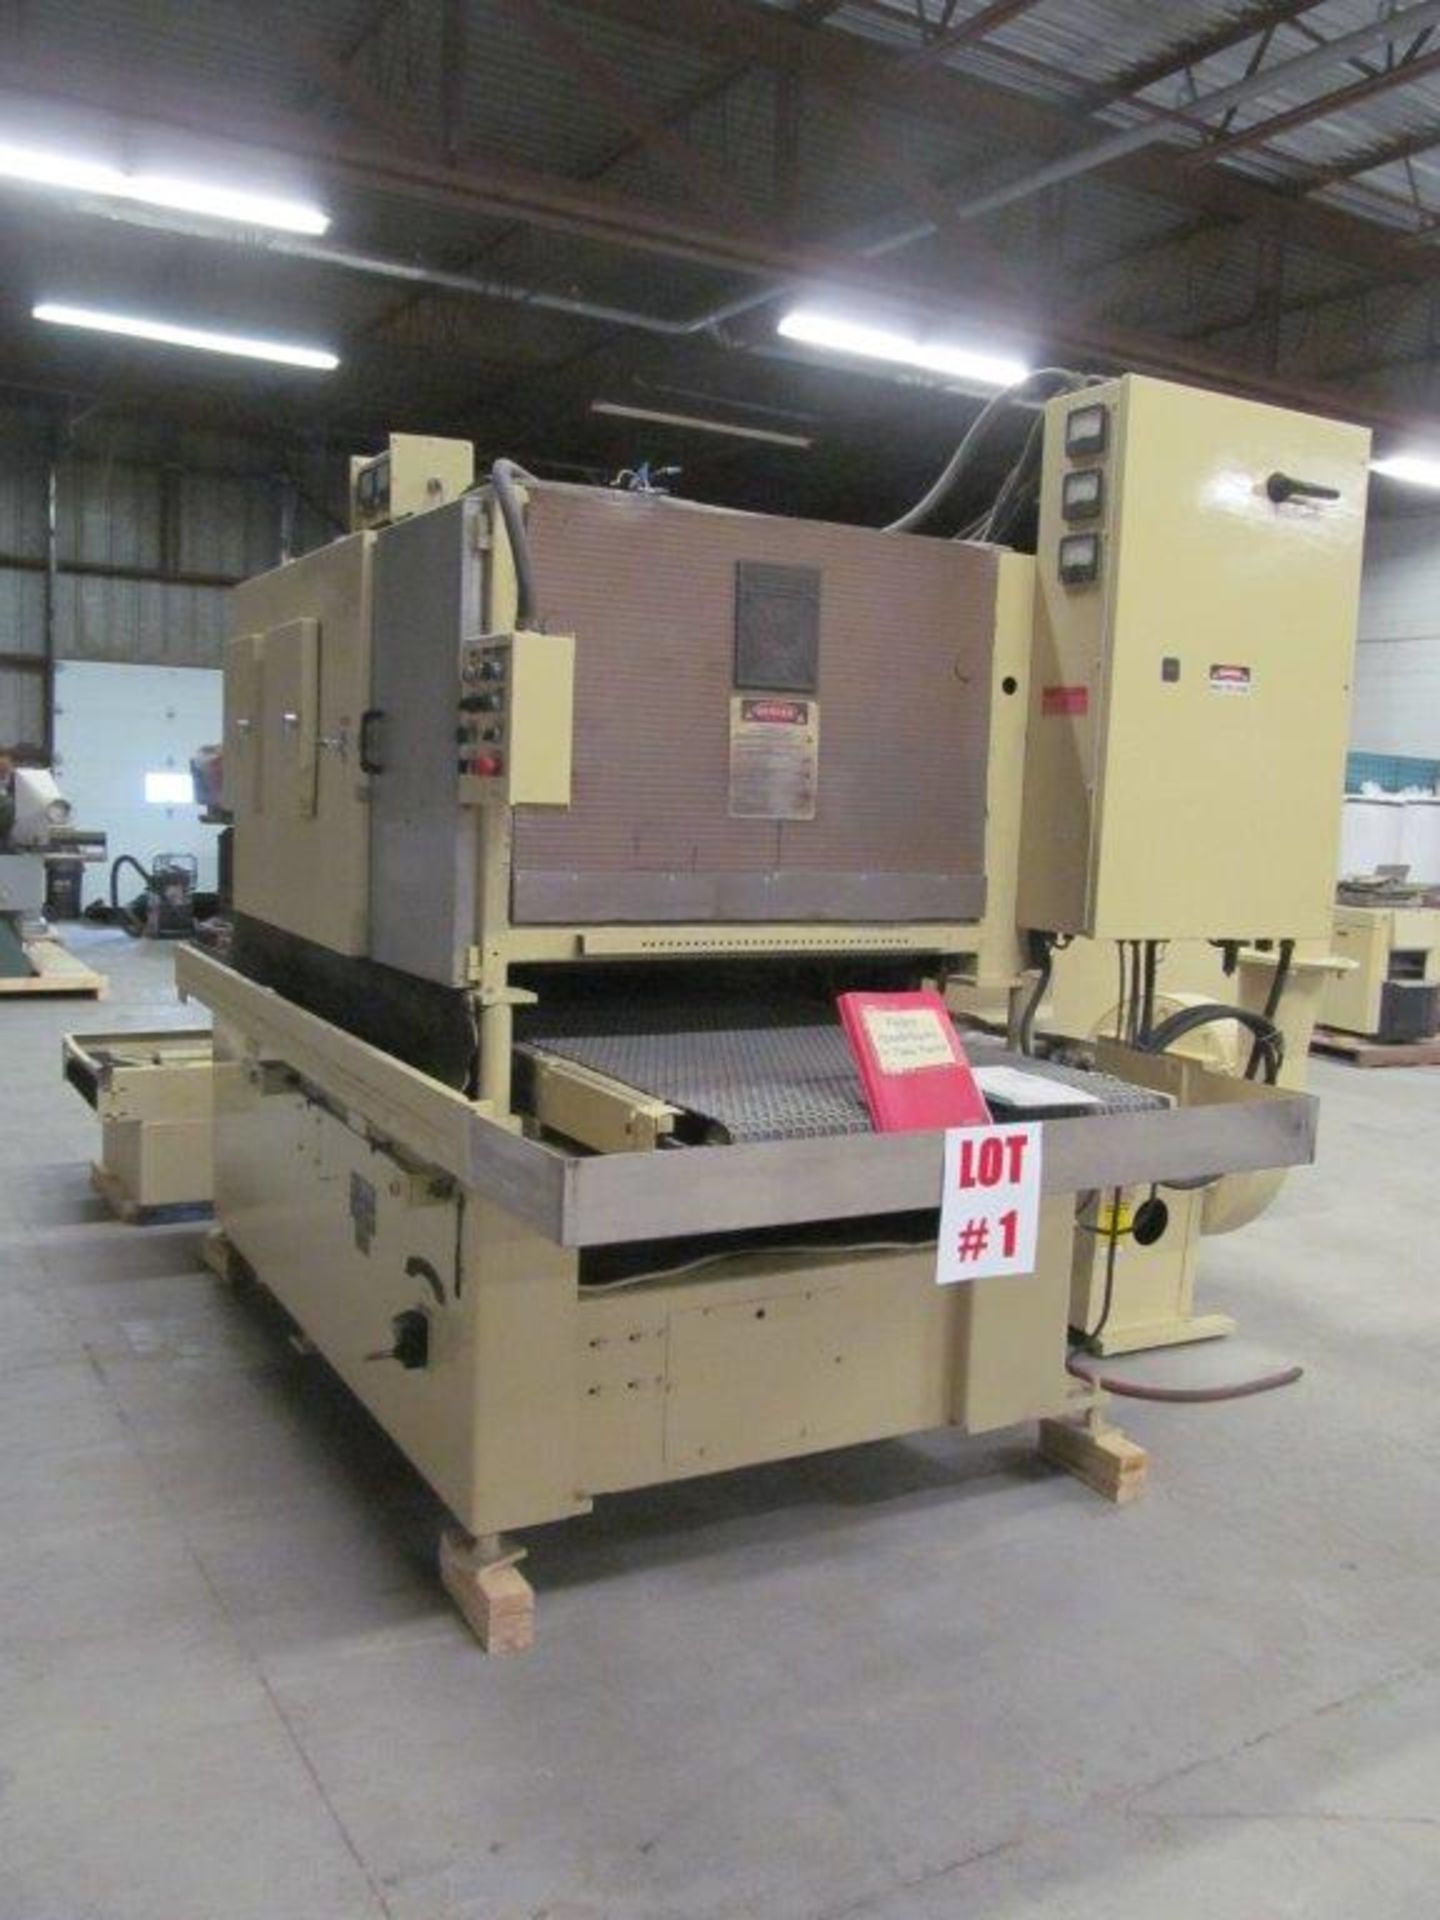 TIMESAVER MODEL 237-2CMPLW, S/N: 19989, 36" WIDE MATERIAL WET TYPE, ELECTRICS: 575 V / 3PH / 60C,